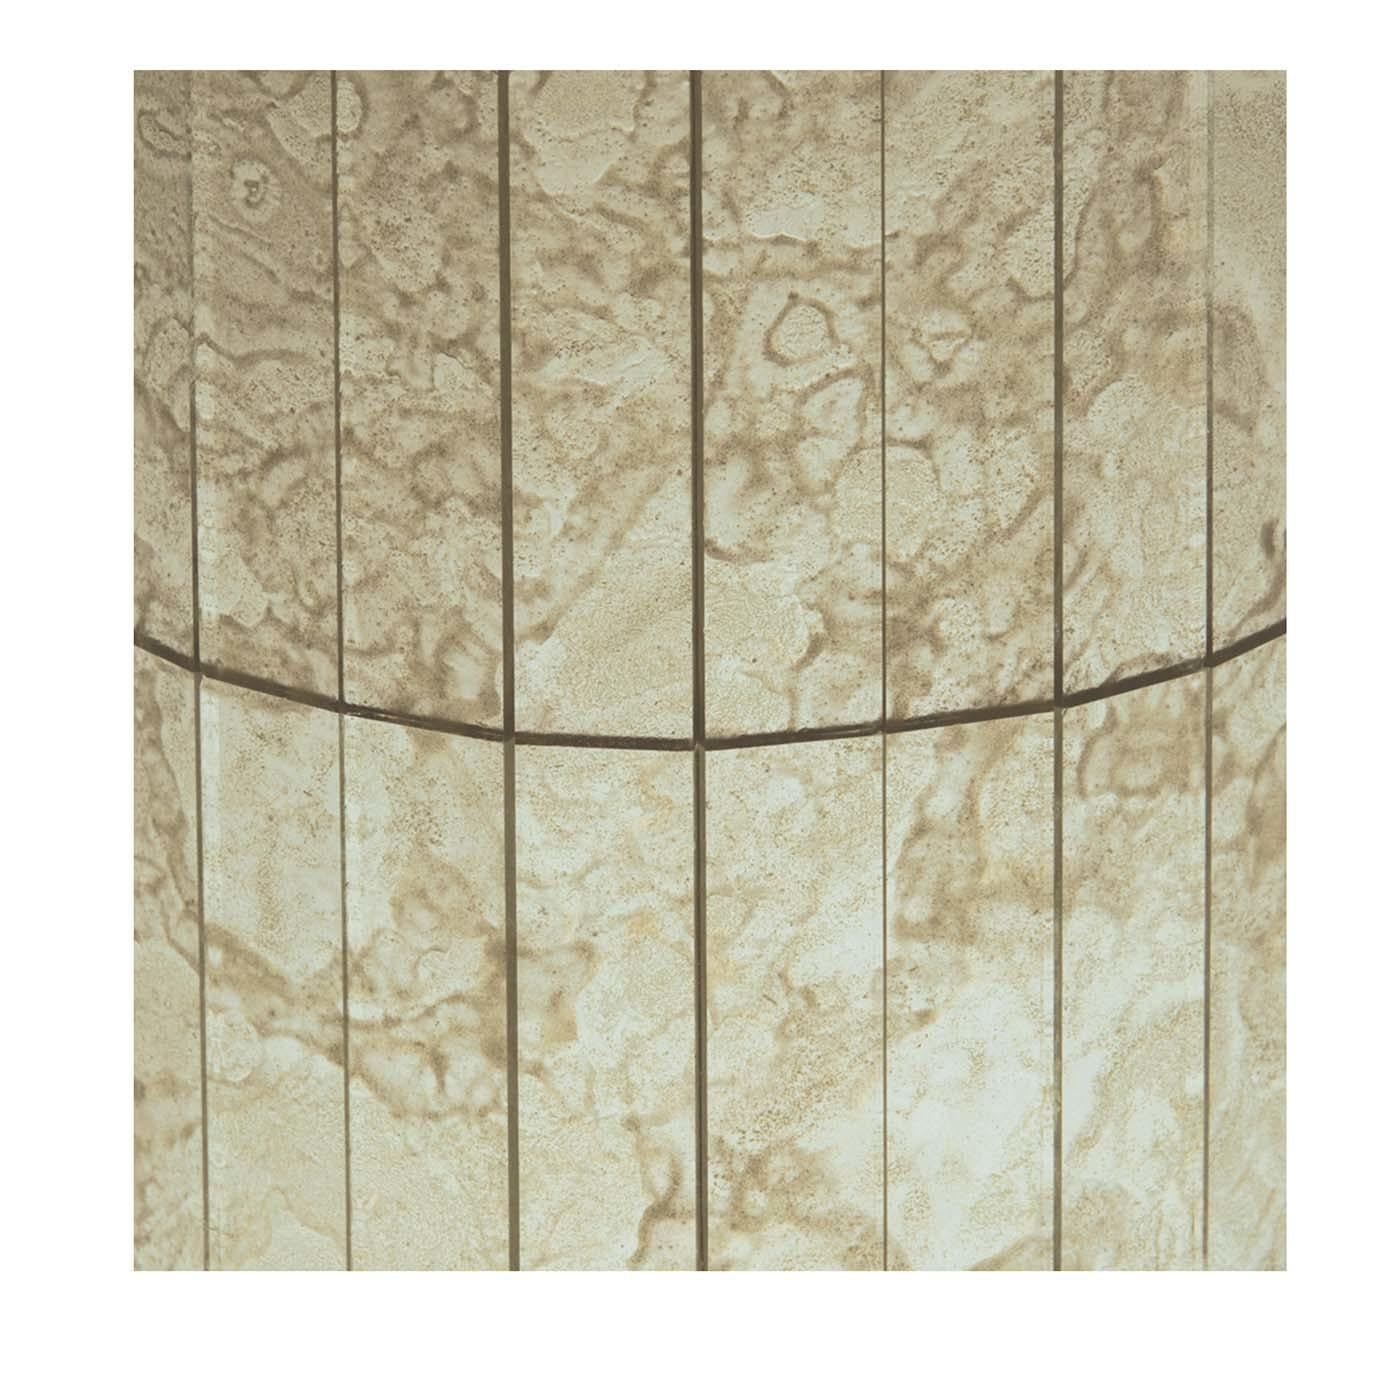 These time-weathered and delicately colored canvased mosaic glass panels by Antique Mirror are made up of wispy and swirling shades of white, gray, and gold. It will add a romantic and romantic accent to walls in both modern and traditional homes.